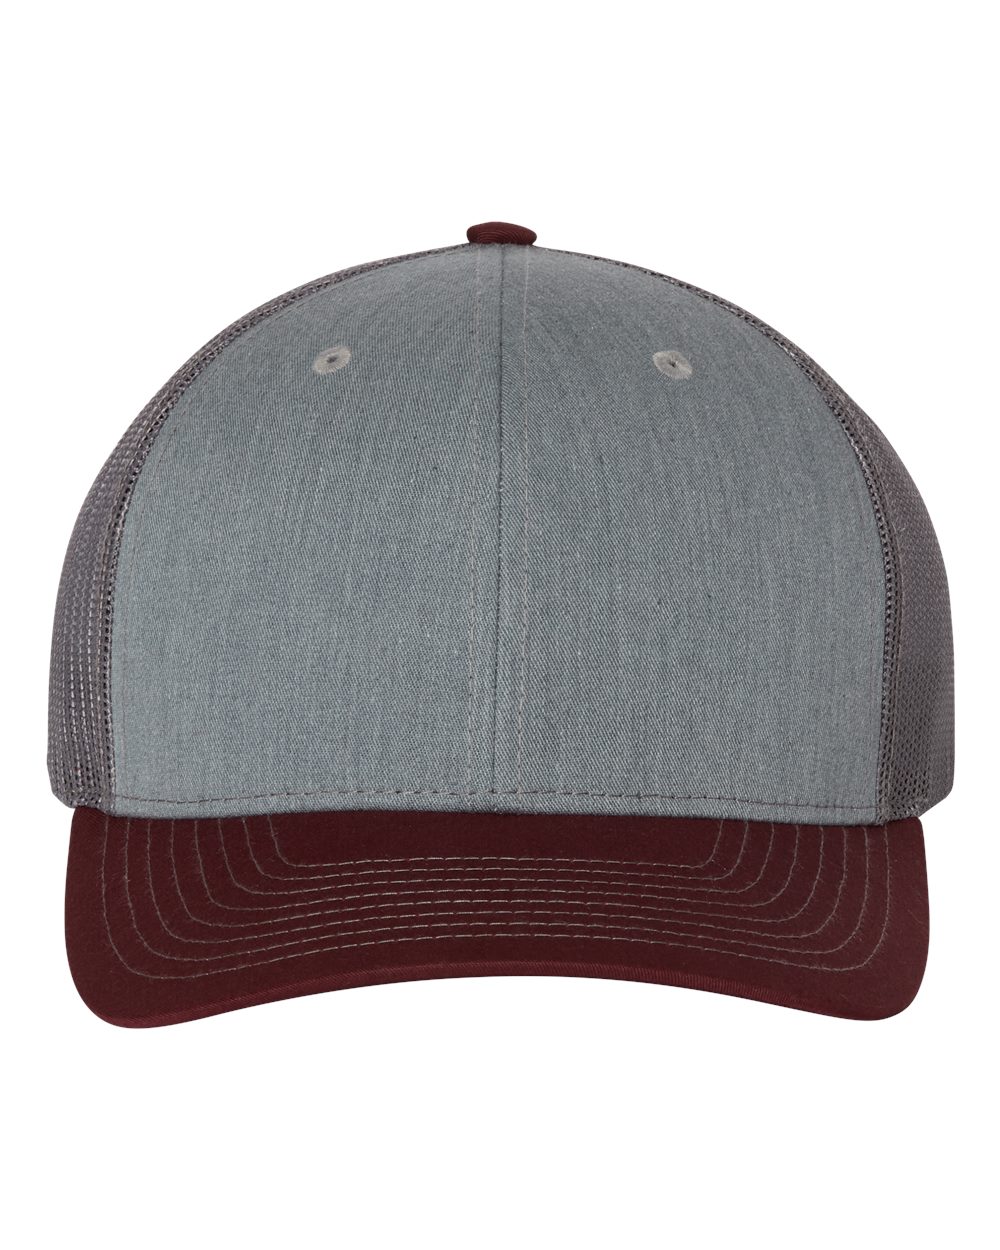 click to view Heather Grey/Charcoal/ Maroon